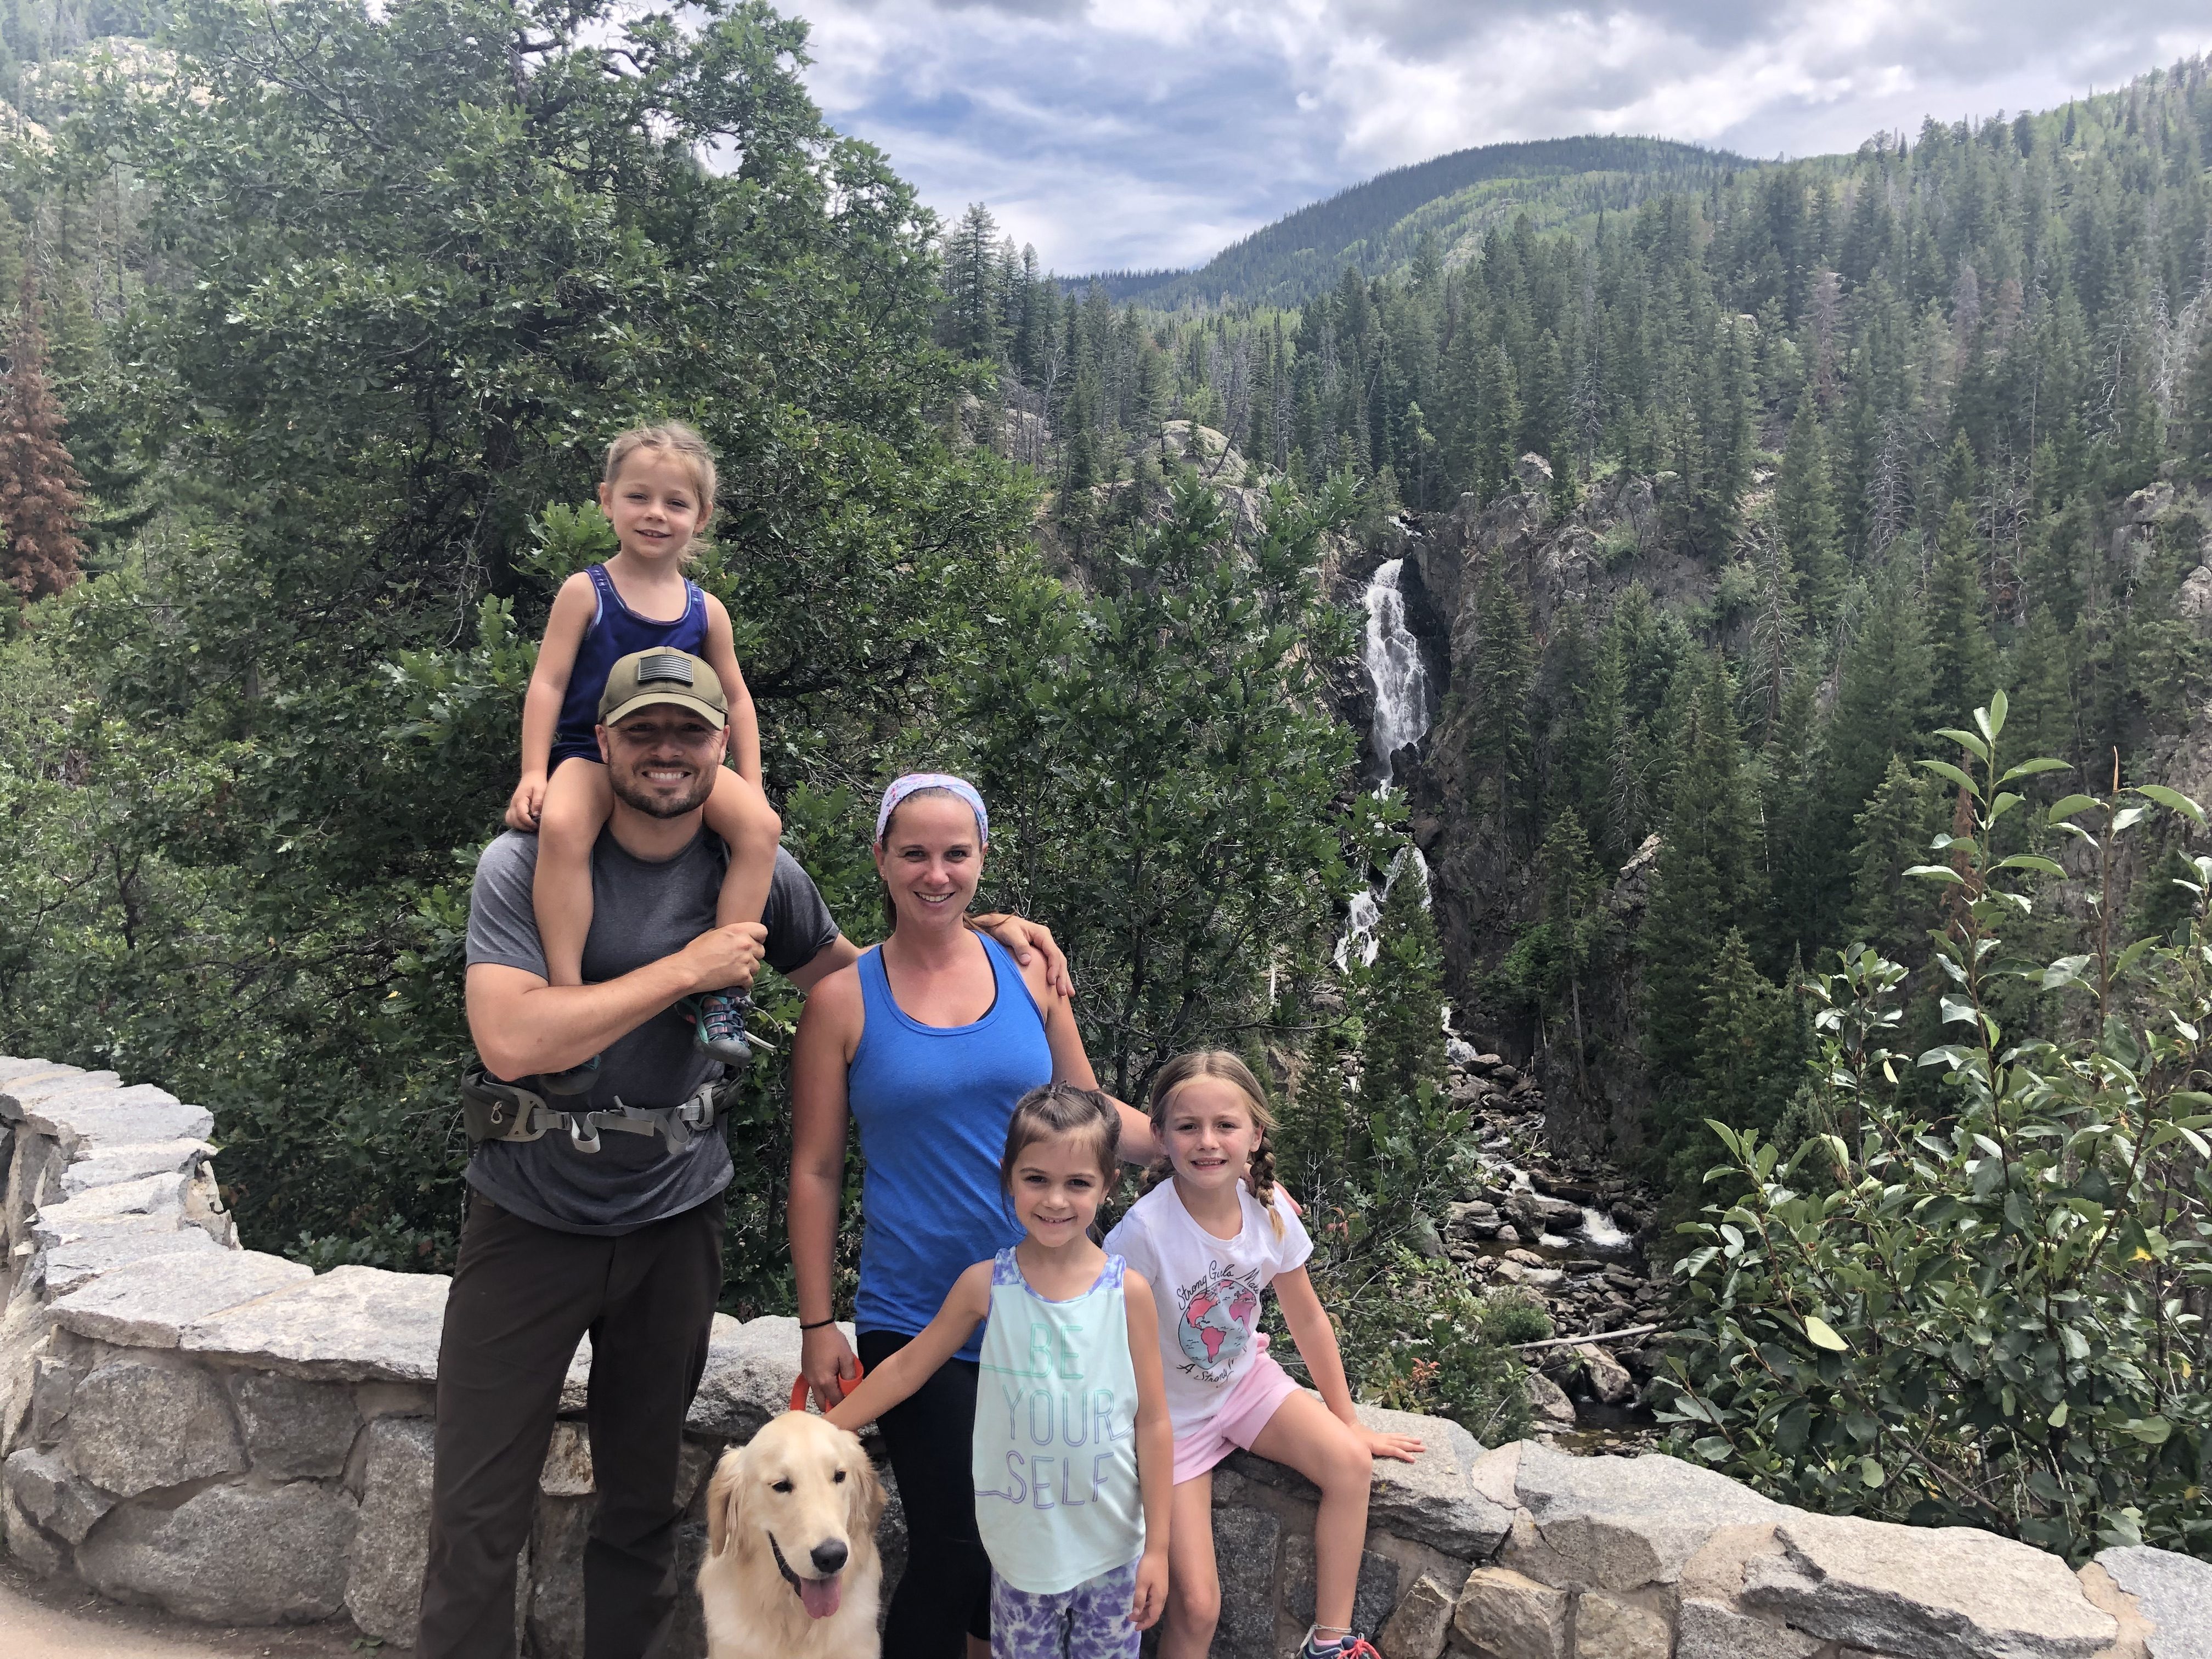 Brown family, mom, dad, 3 little girls, Golden retreiver in front of waterfall. Building resilience in children by creating outdoor adventures